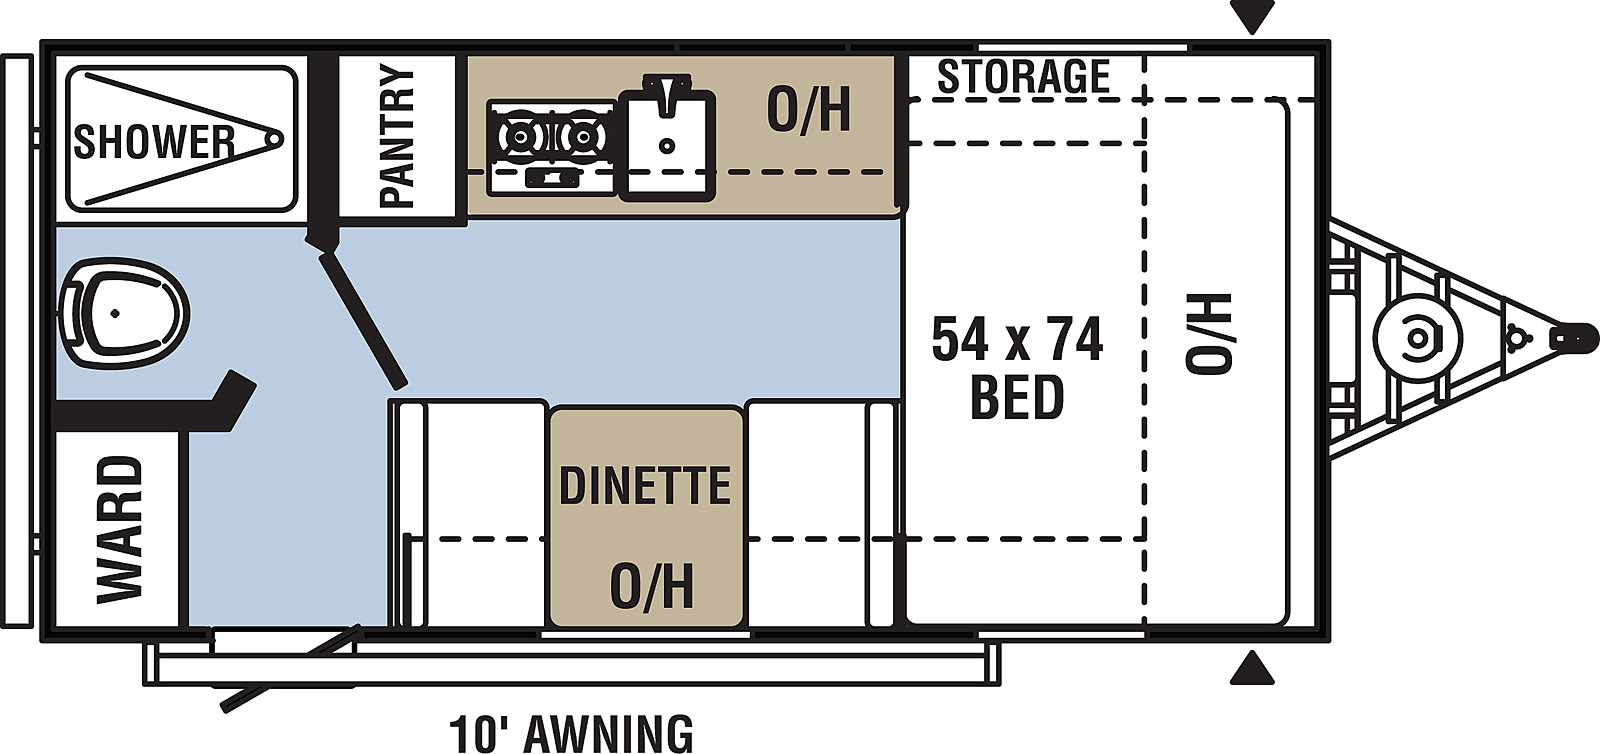 Clipper Ultra-Lite 16CFB floorplan. The 16CFB has no slide outs and one entry door.